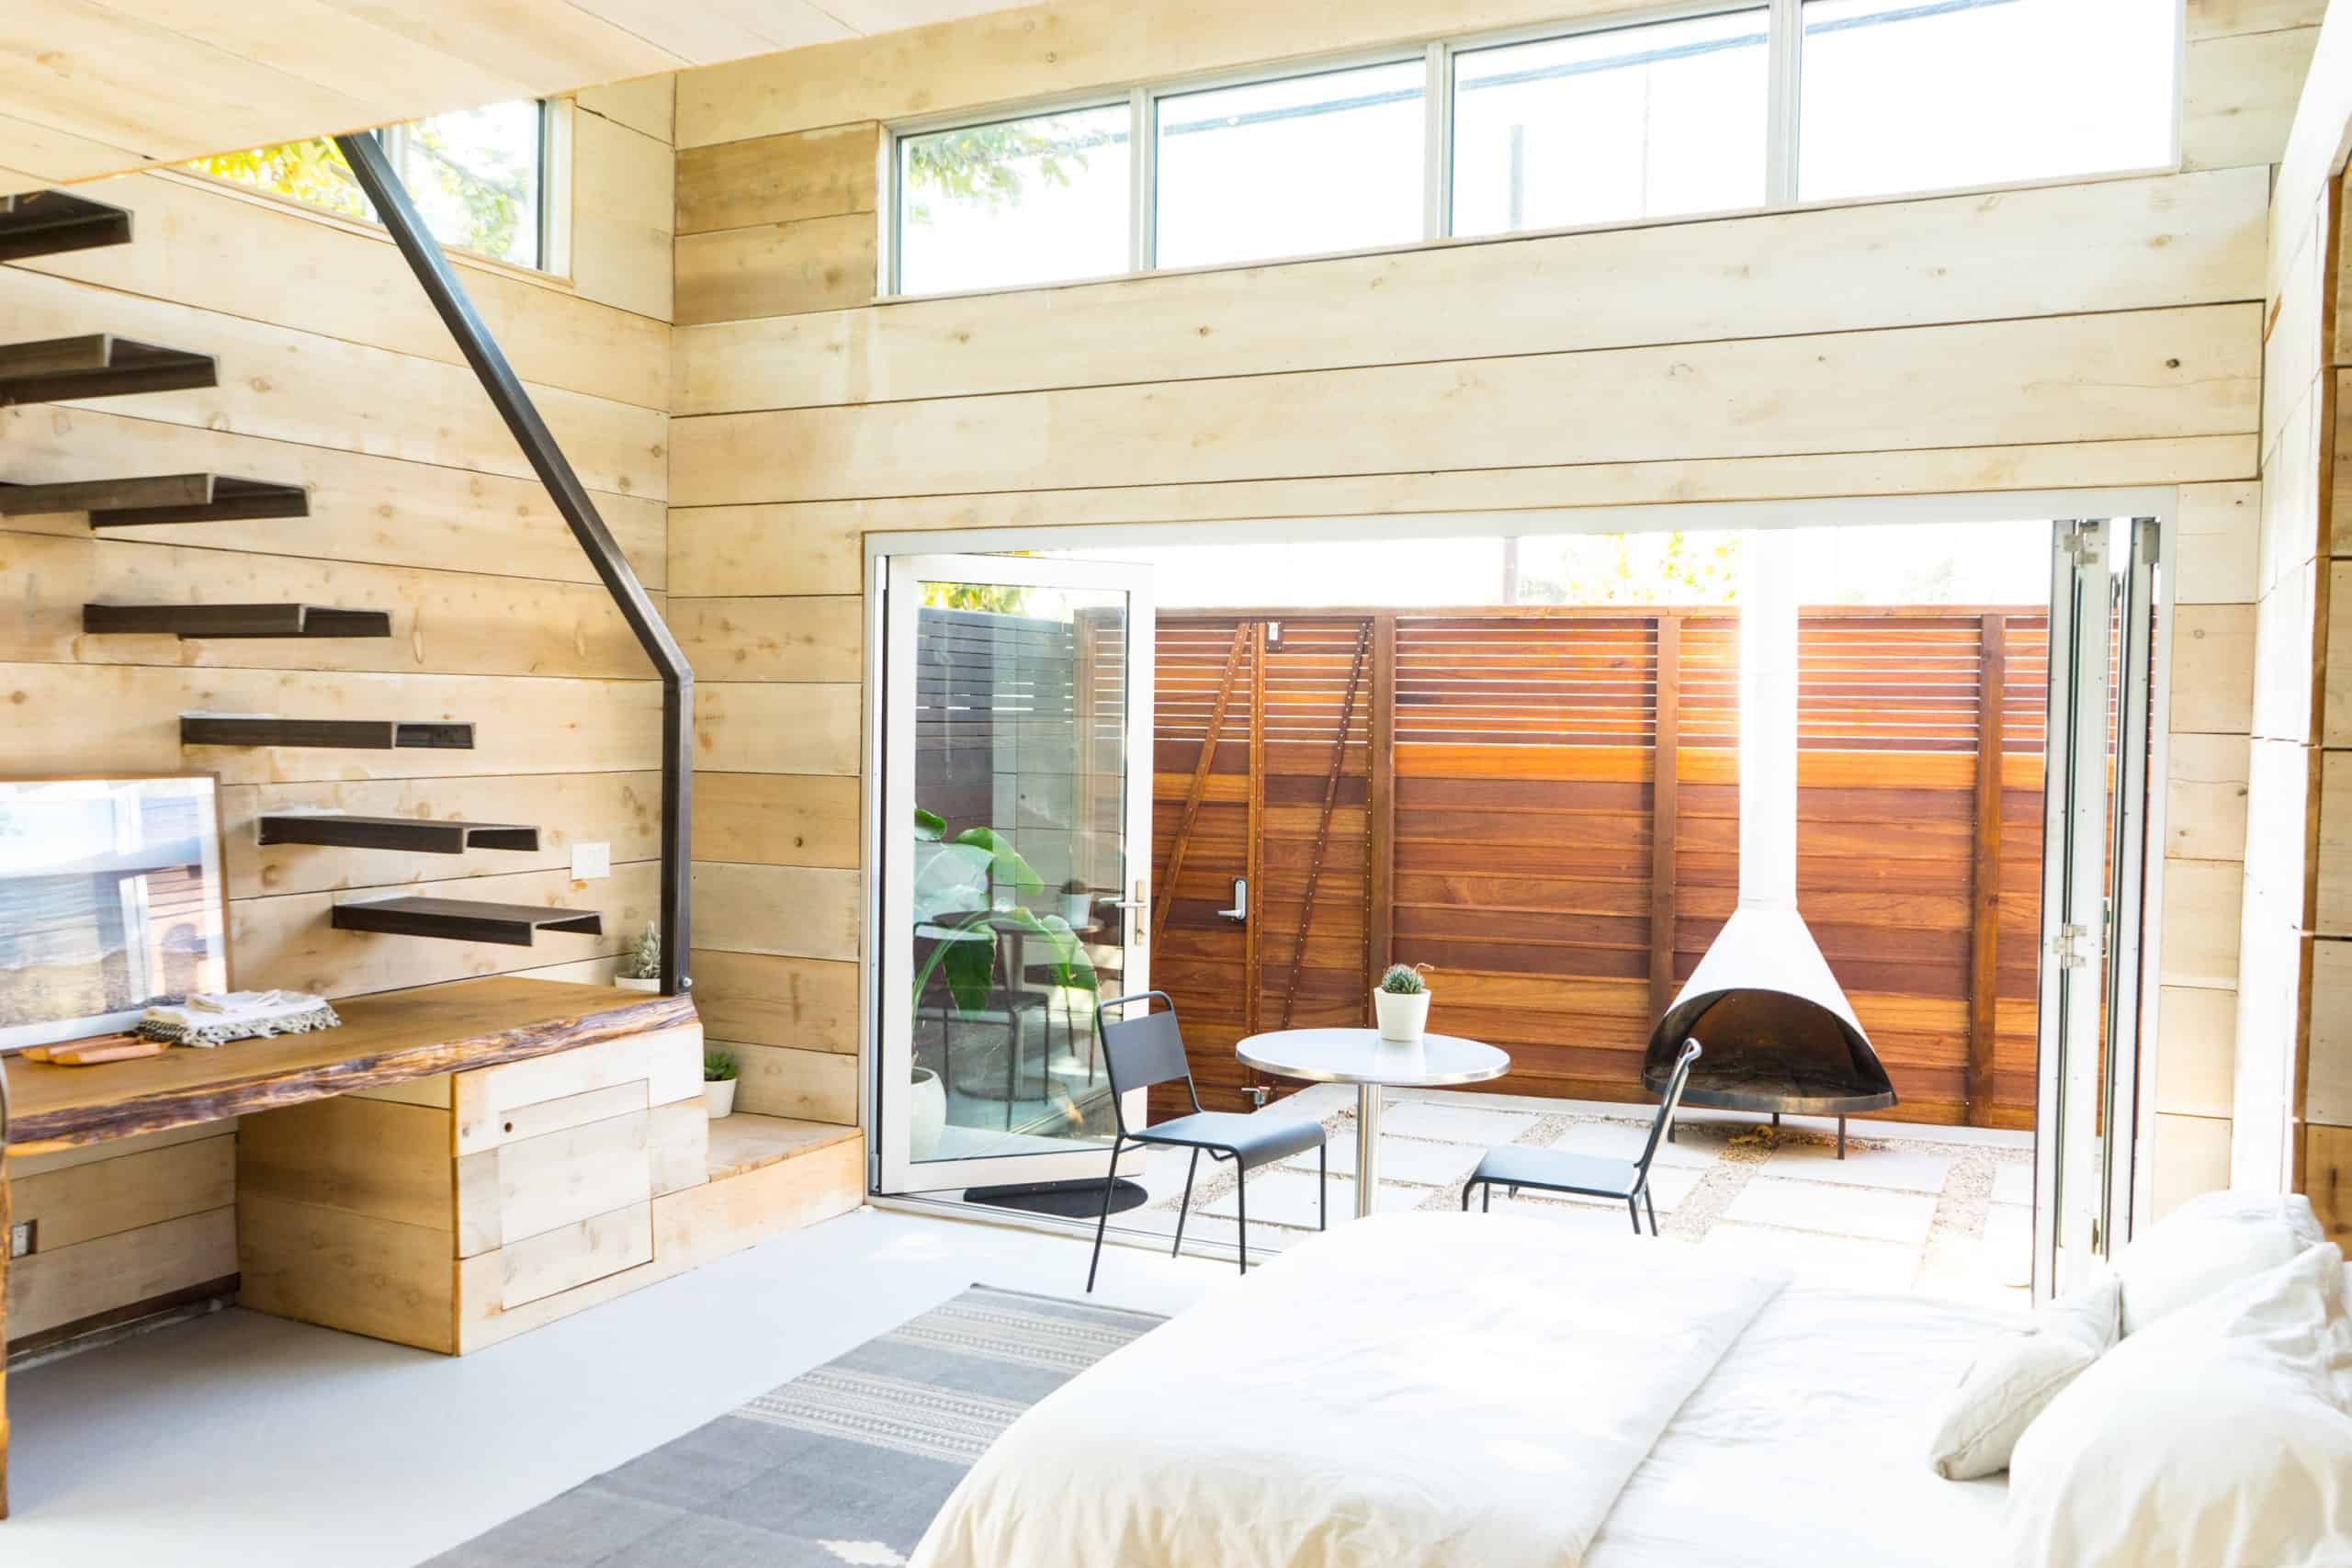 Spaces With Stories: Two Brothers Turn This Garage into a Modern Beach Cabin | Peerspace